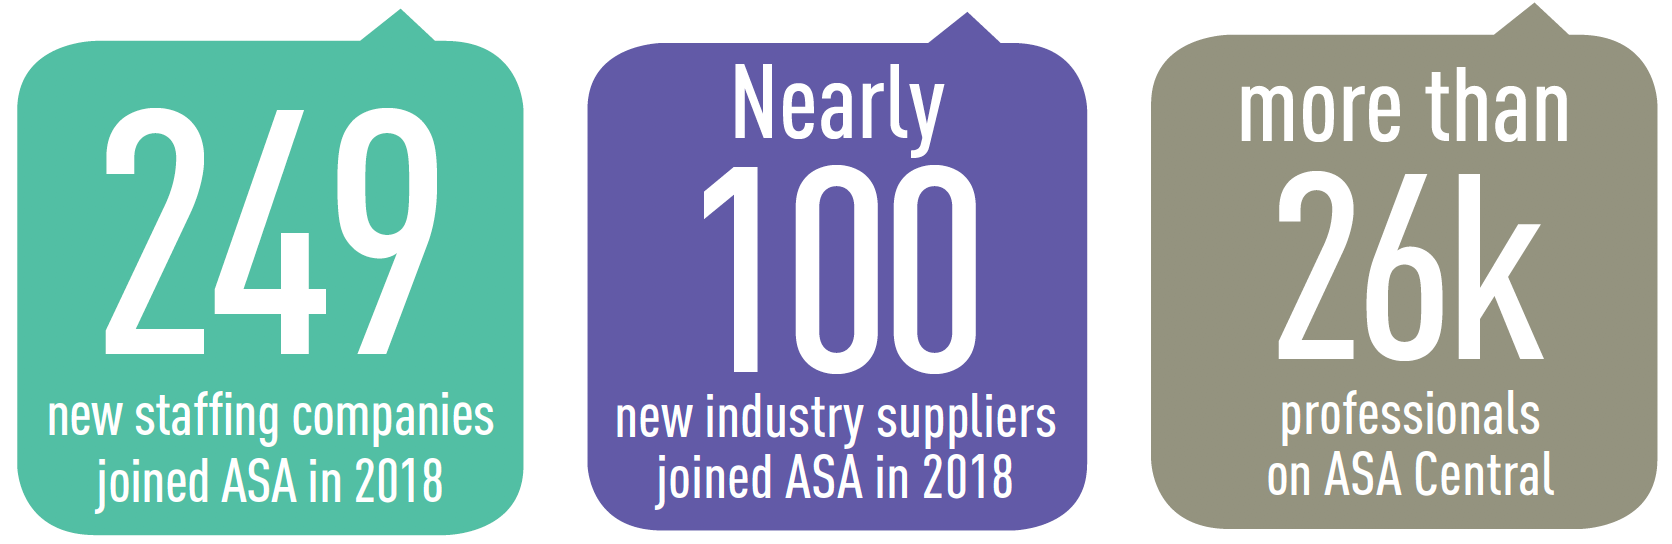 ASA Delivers the Largest Audience of Staffing Professionals